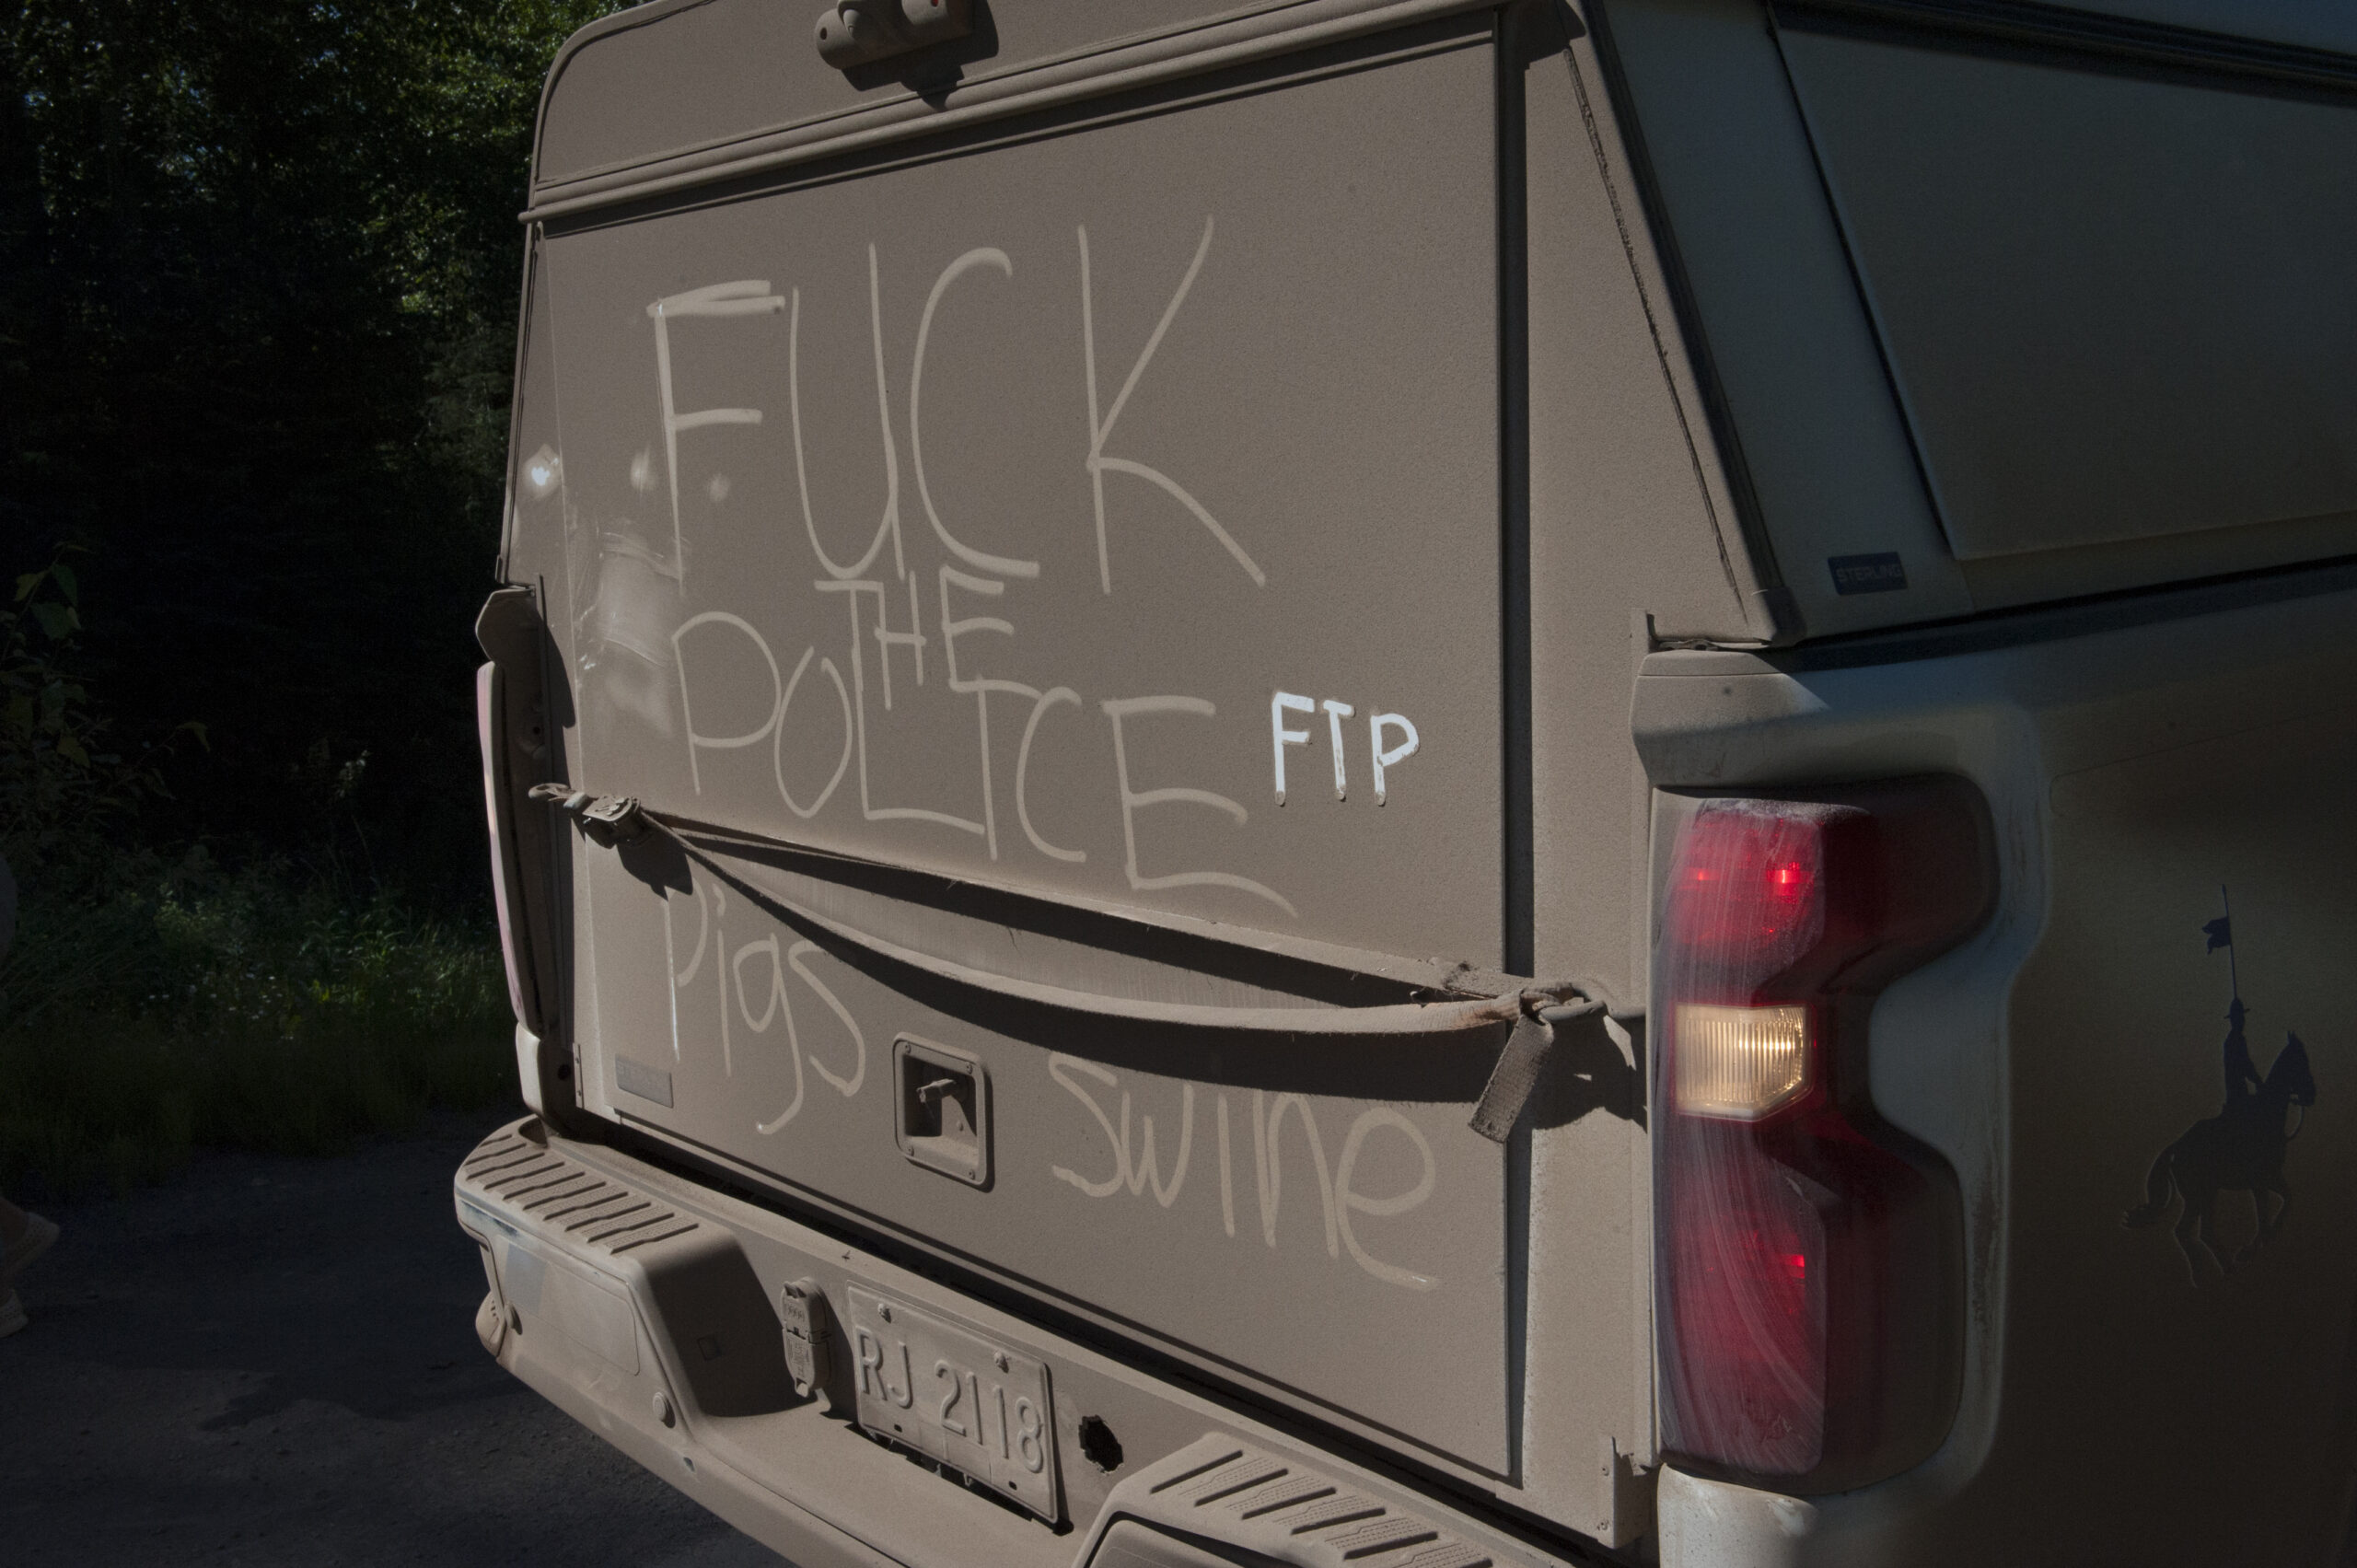 The dirty back of an RCMP truck with "fuck the police" and "pigs swine" written in the dirt